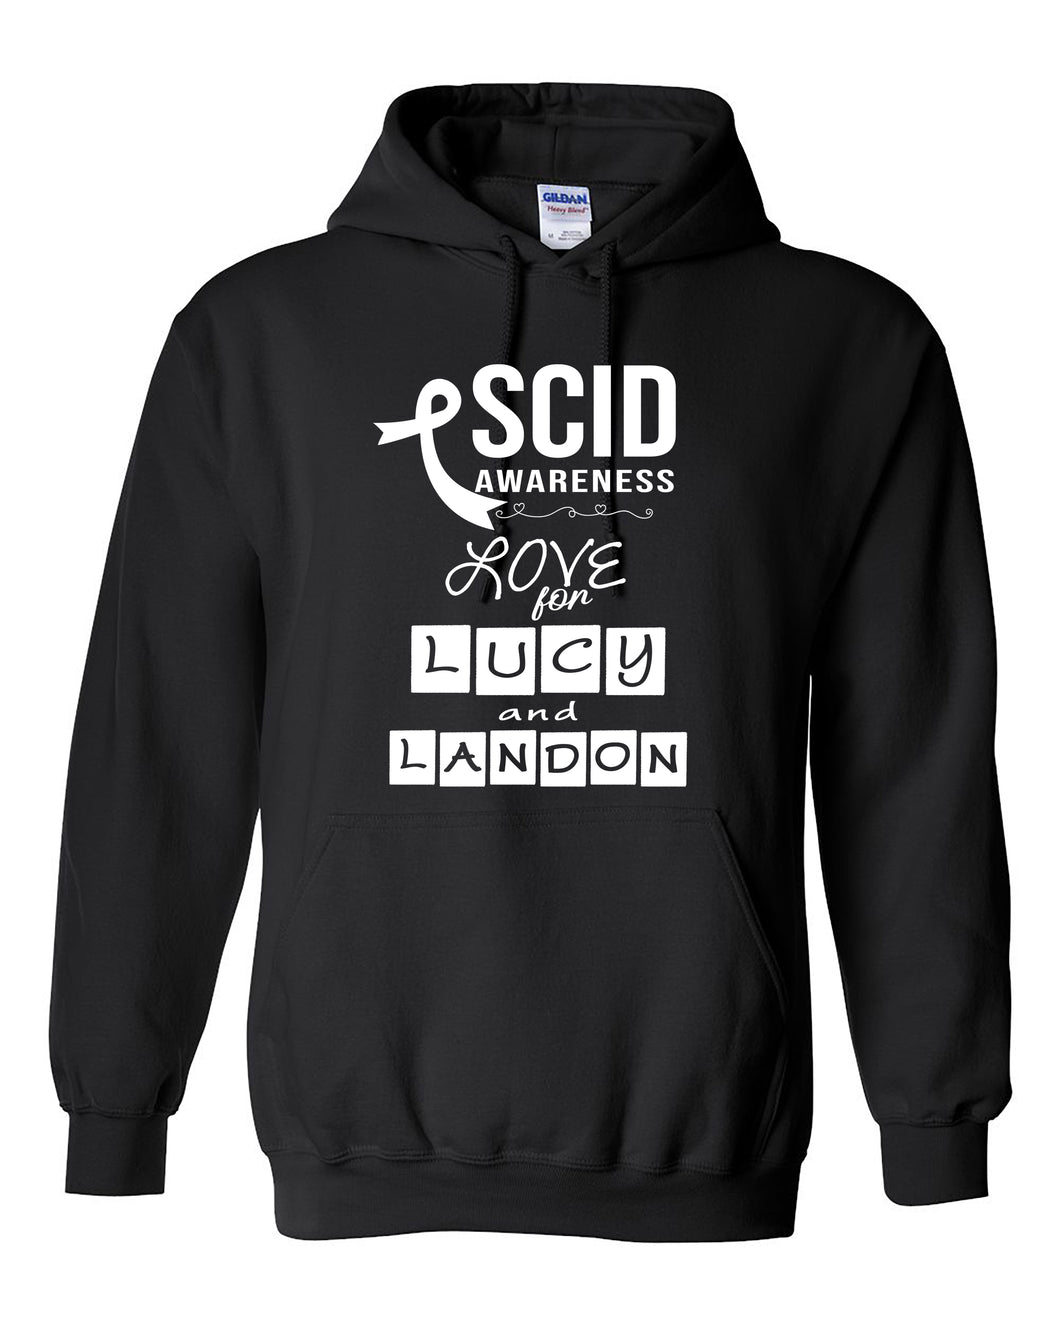 Love for Lucy & Landon Hoodie